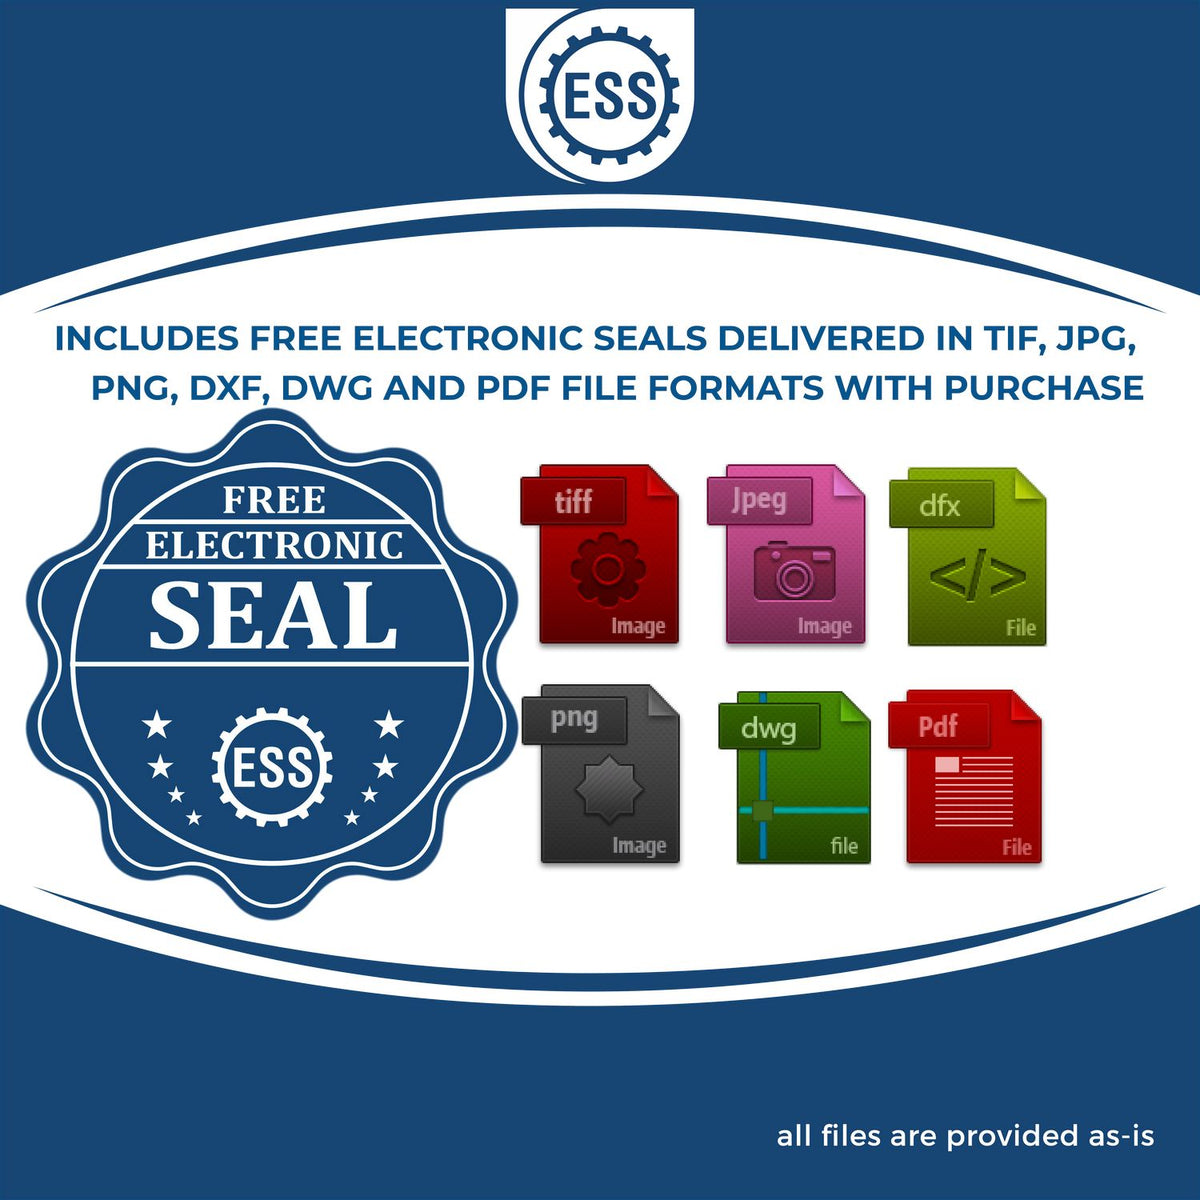 An infographic for the free electronic seal for the Heavy Duty Cast Iron Pennsylvania Architect Embosser illustrating the different file type icons such as DXF, DWG, TIF, JPG and PNG.